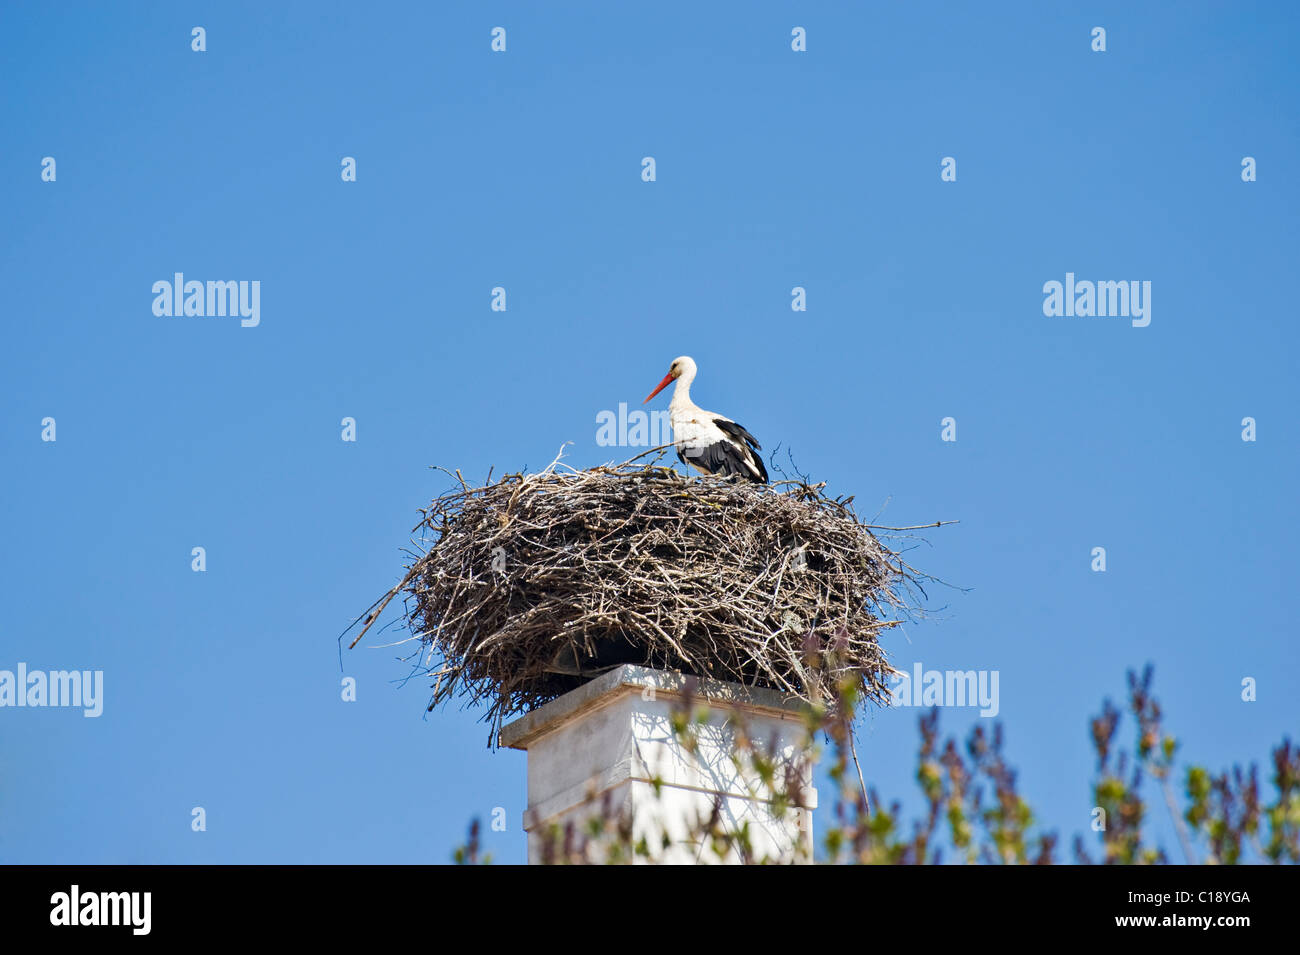 Stork's nest with a Stork (Ciconiidae) perched on a nest above a chimney stack, Krumbach, Lower Austria, Austria, Europe Stock Photo